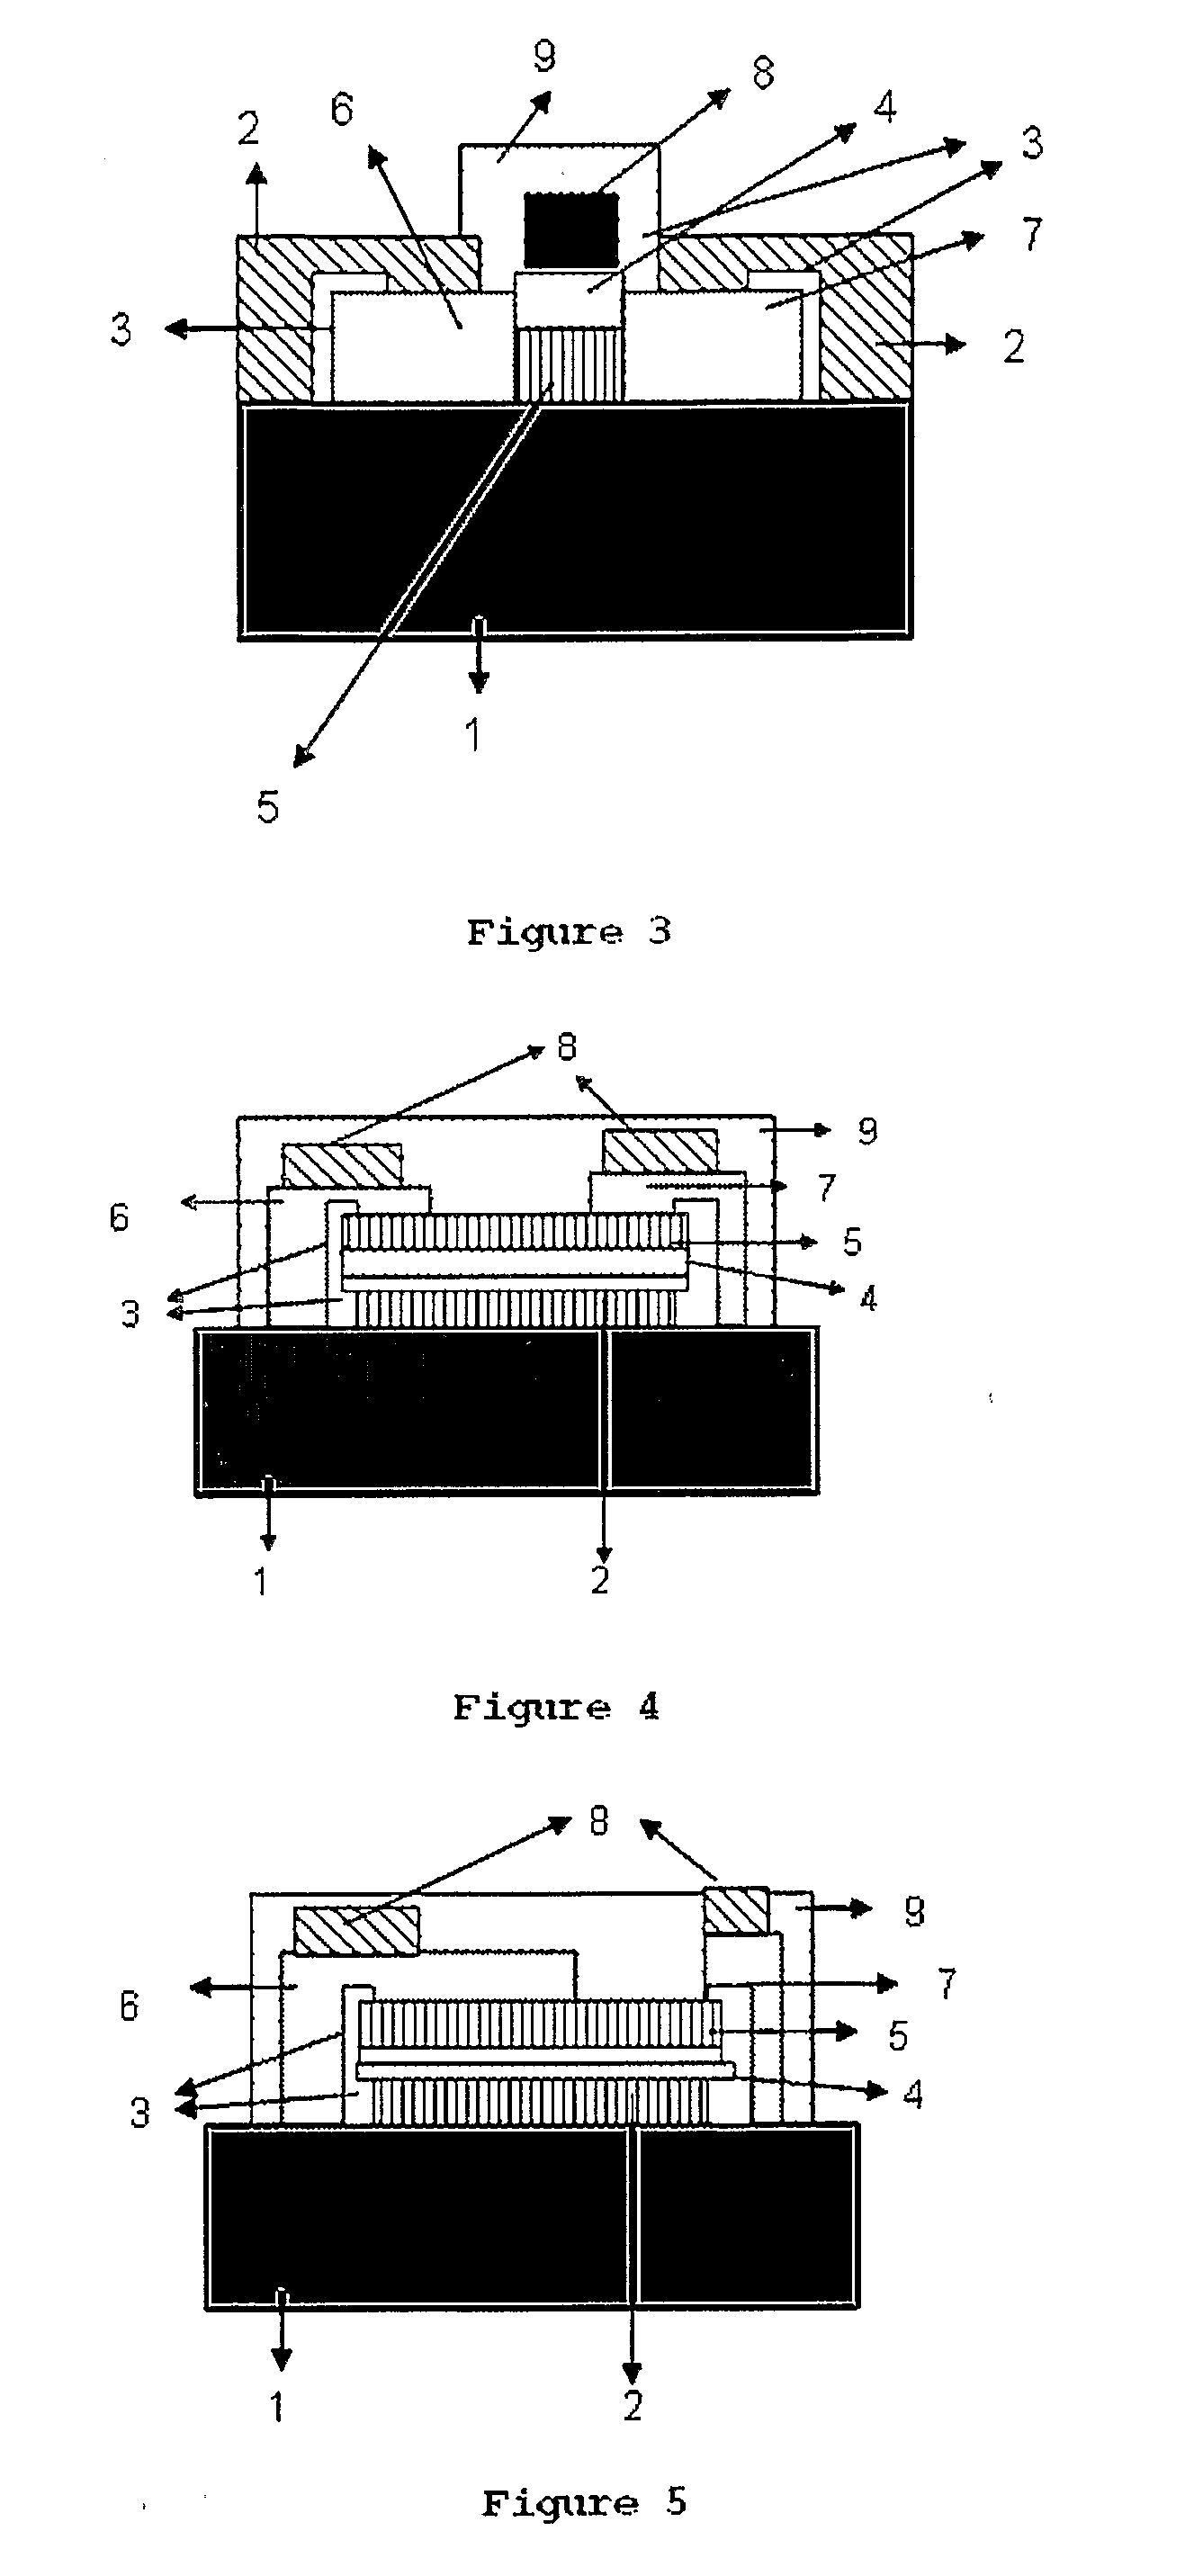 ELECTRONIC SEMICONDUCTOR DEVICE BASED ON COPPER NICKEL AND GALLIUM-TIN-ZINC-COPPER-TITANIUM p AND n-TYPE OXIDES, THEIR APPLICATIONS AND CORRESPONDING MANUFACTURE PROCESS